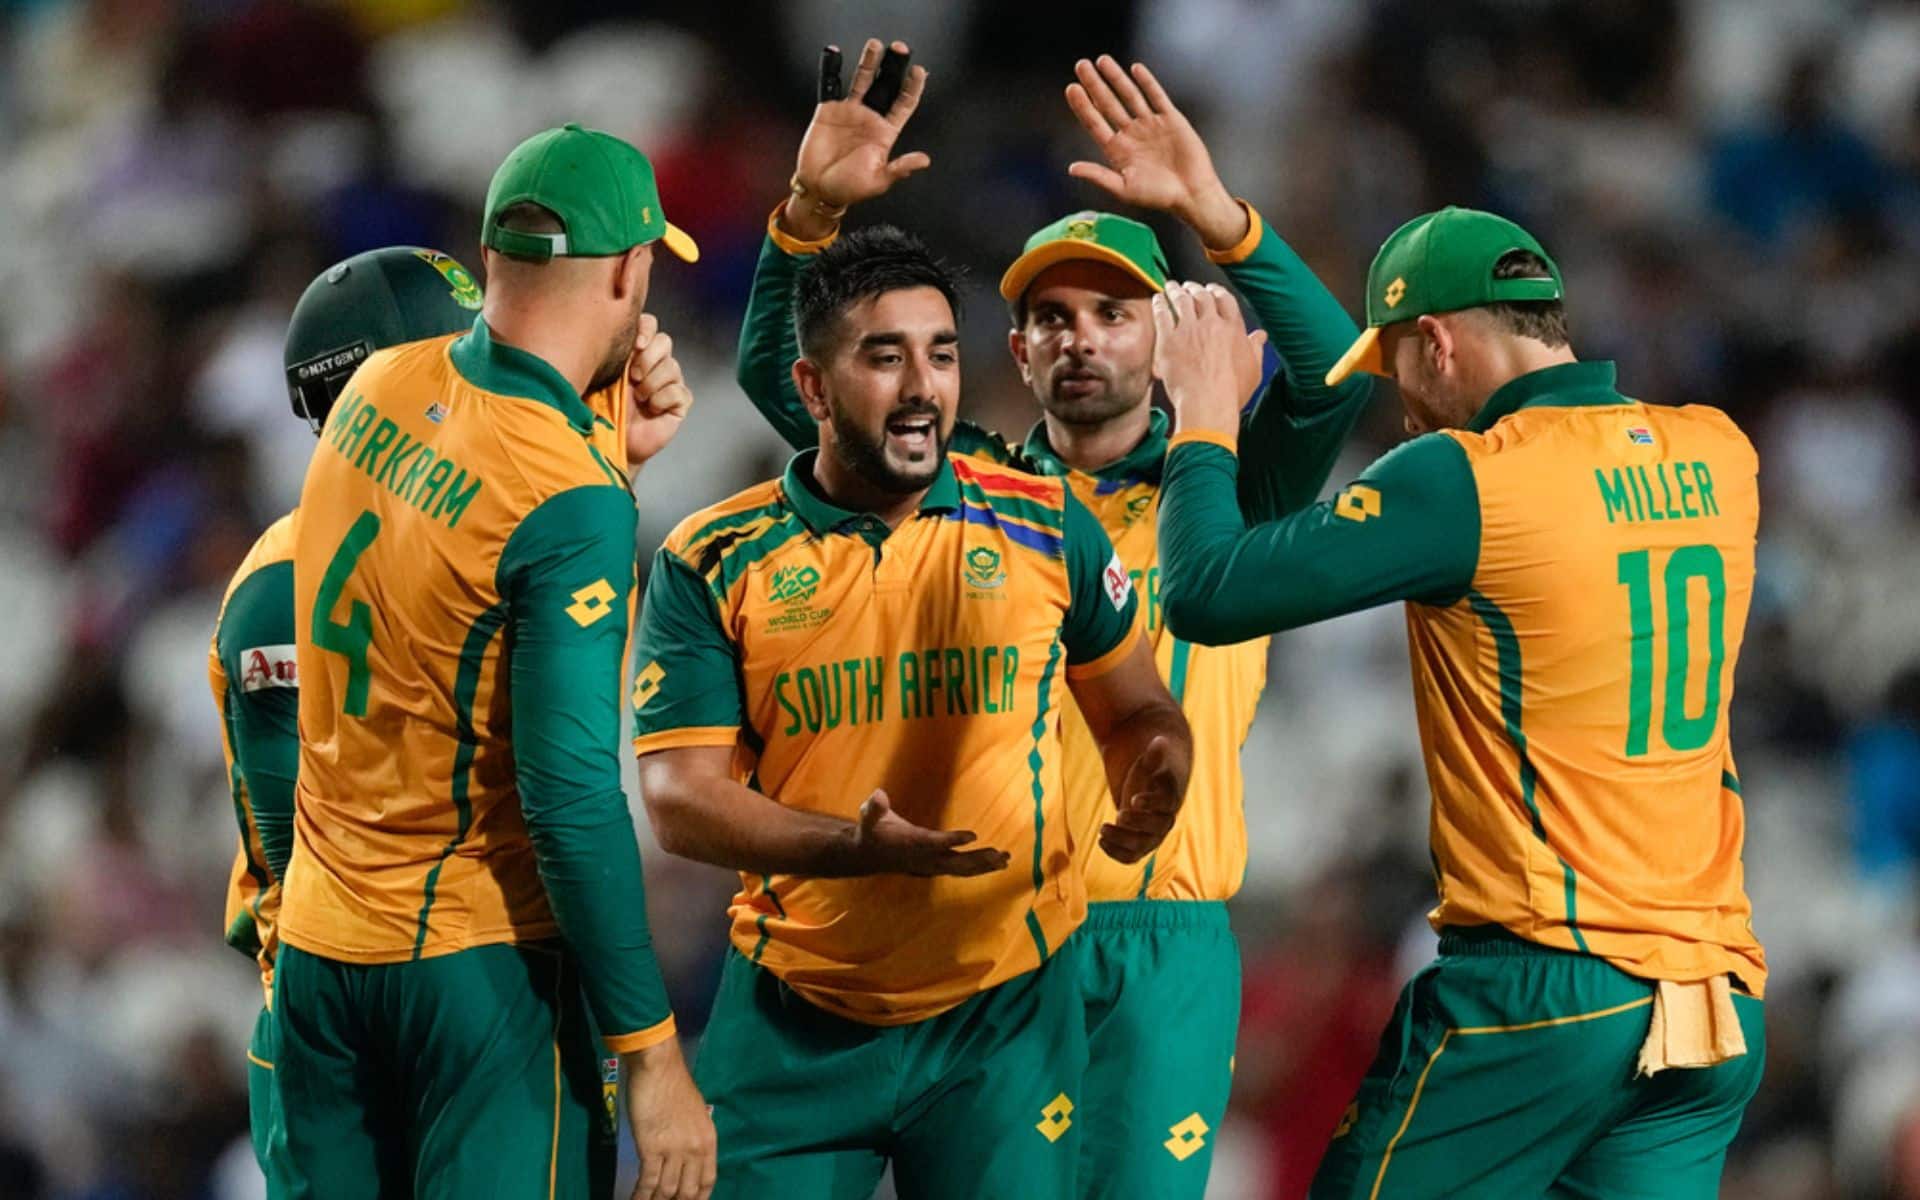 Tabraiz Shamsi has been in a great wicket-taking form in the tournament [AP Photos]